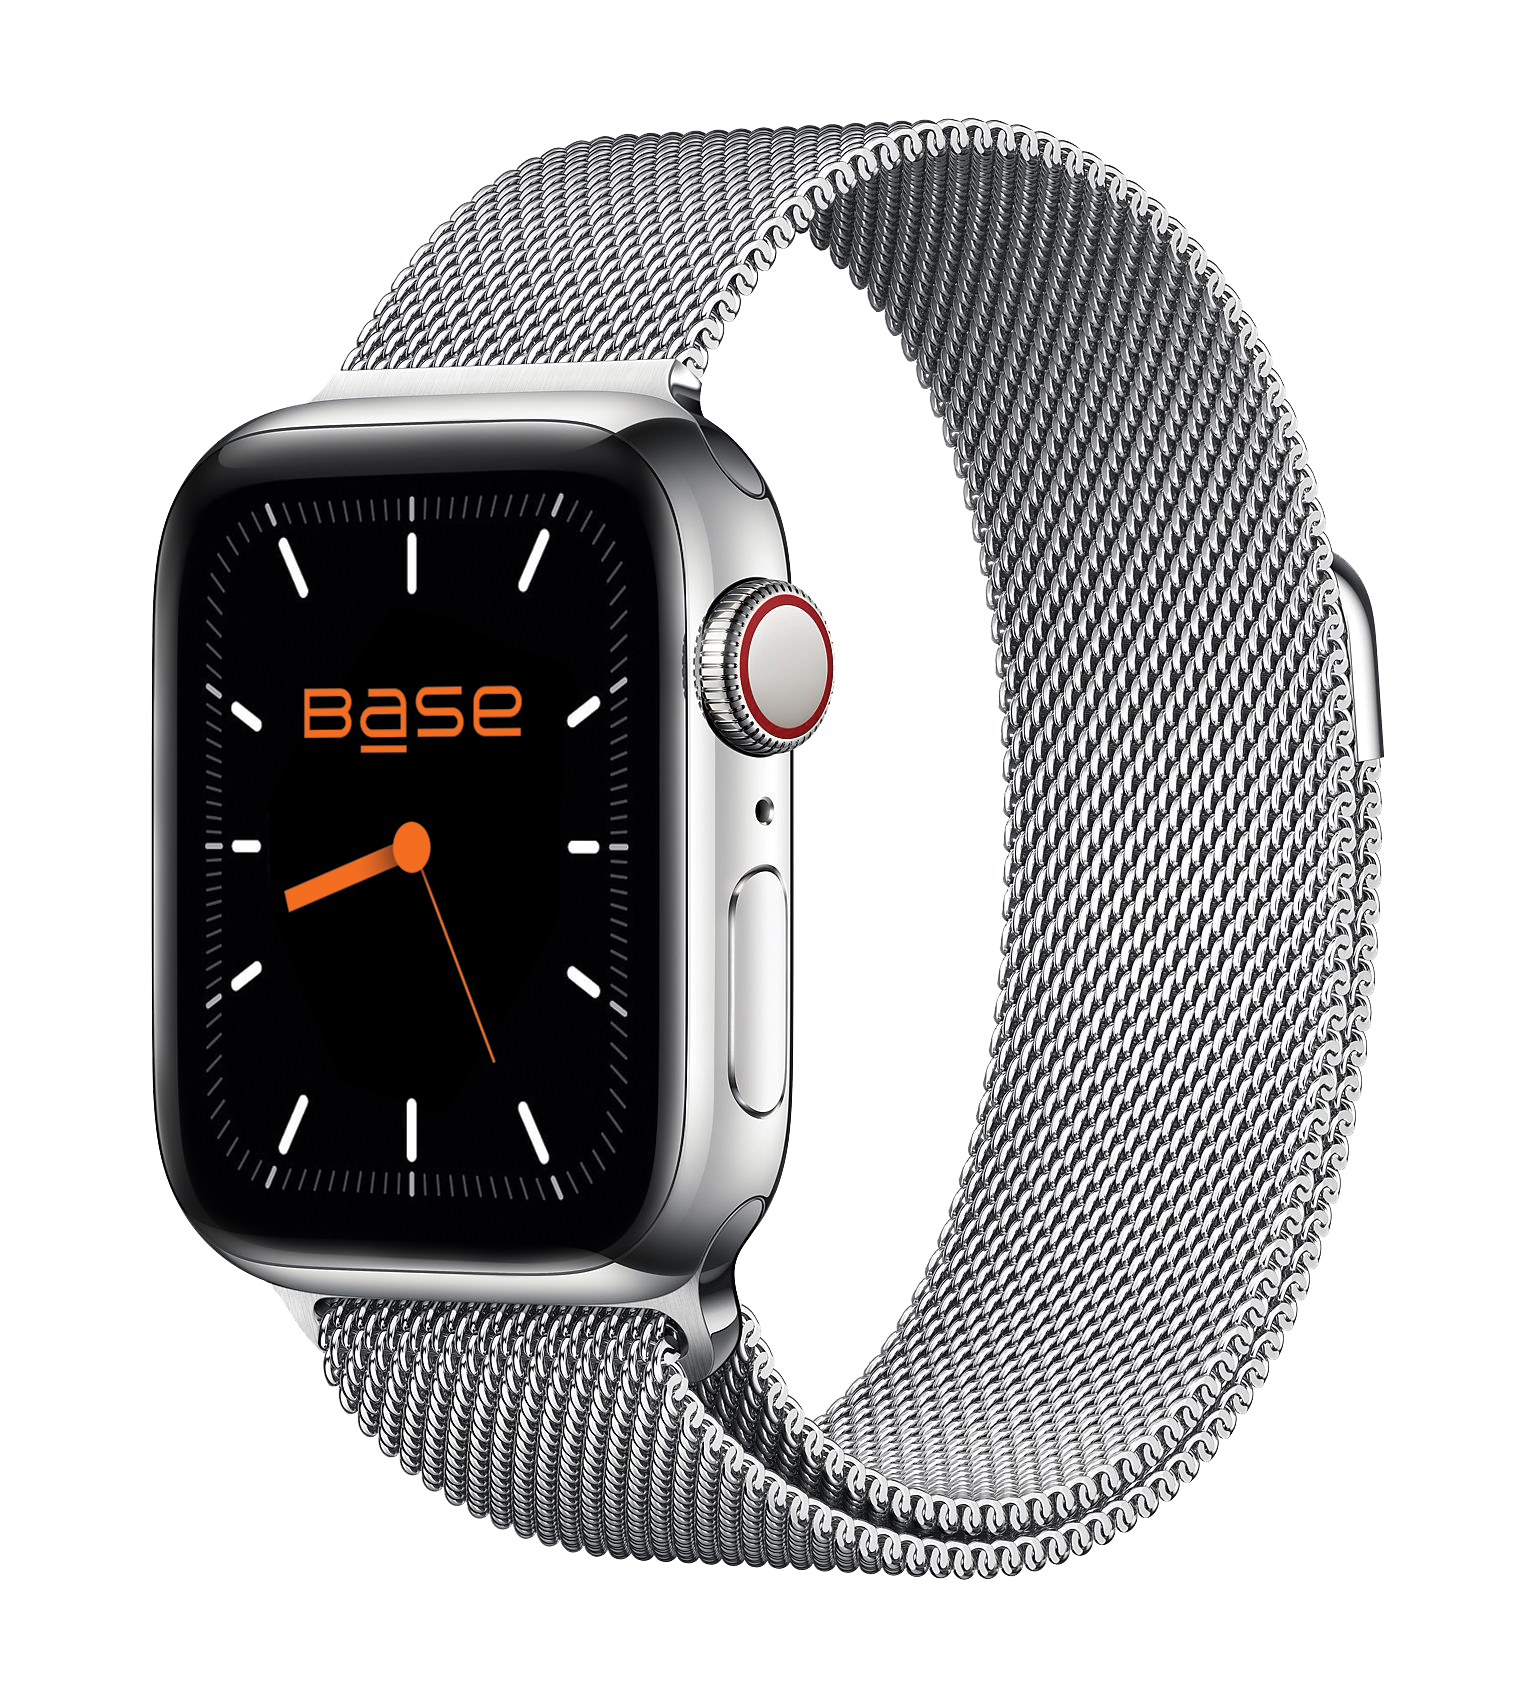 Silver apple watch stainless Steel Bands for Series 1/2/3/4/5/6/7/SE - Large size (42/44/45mm)